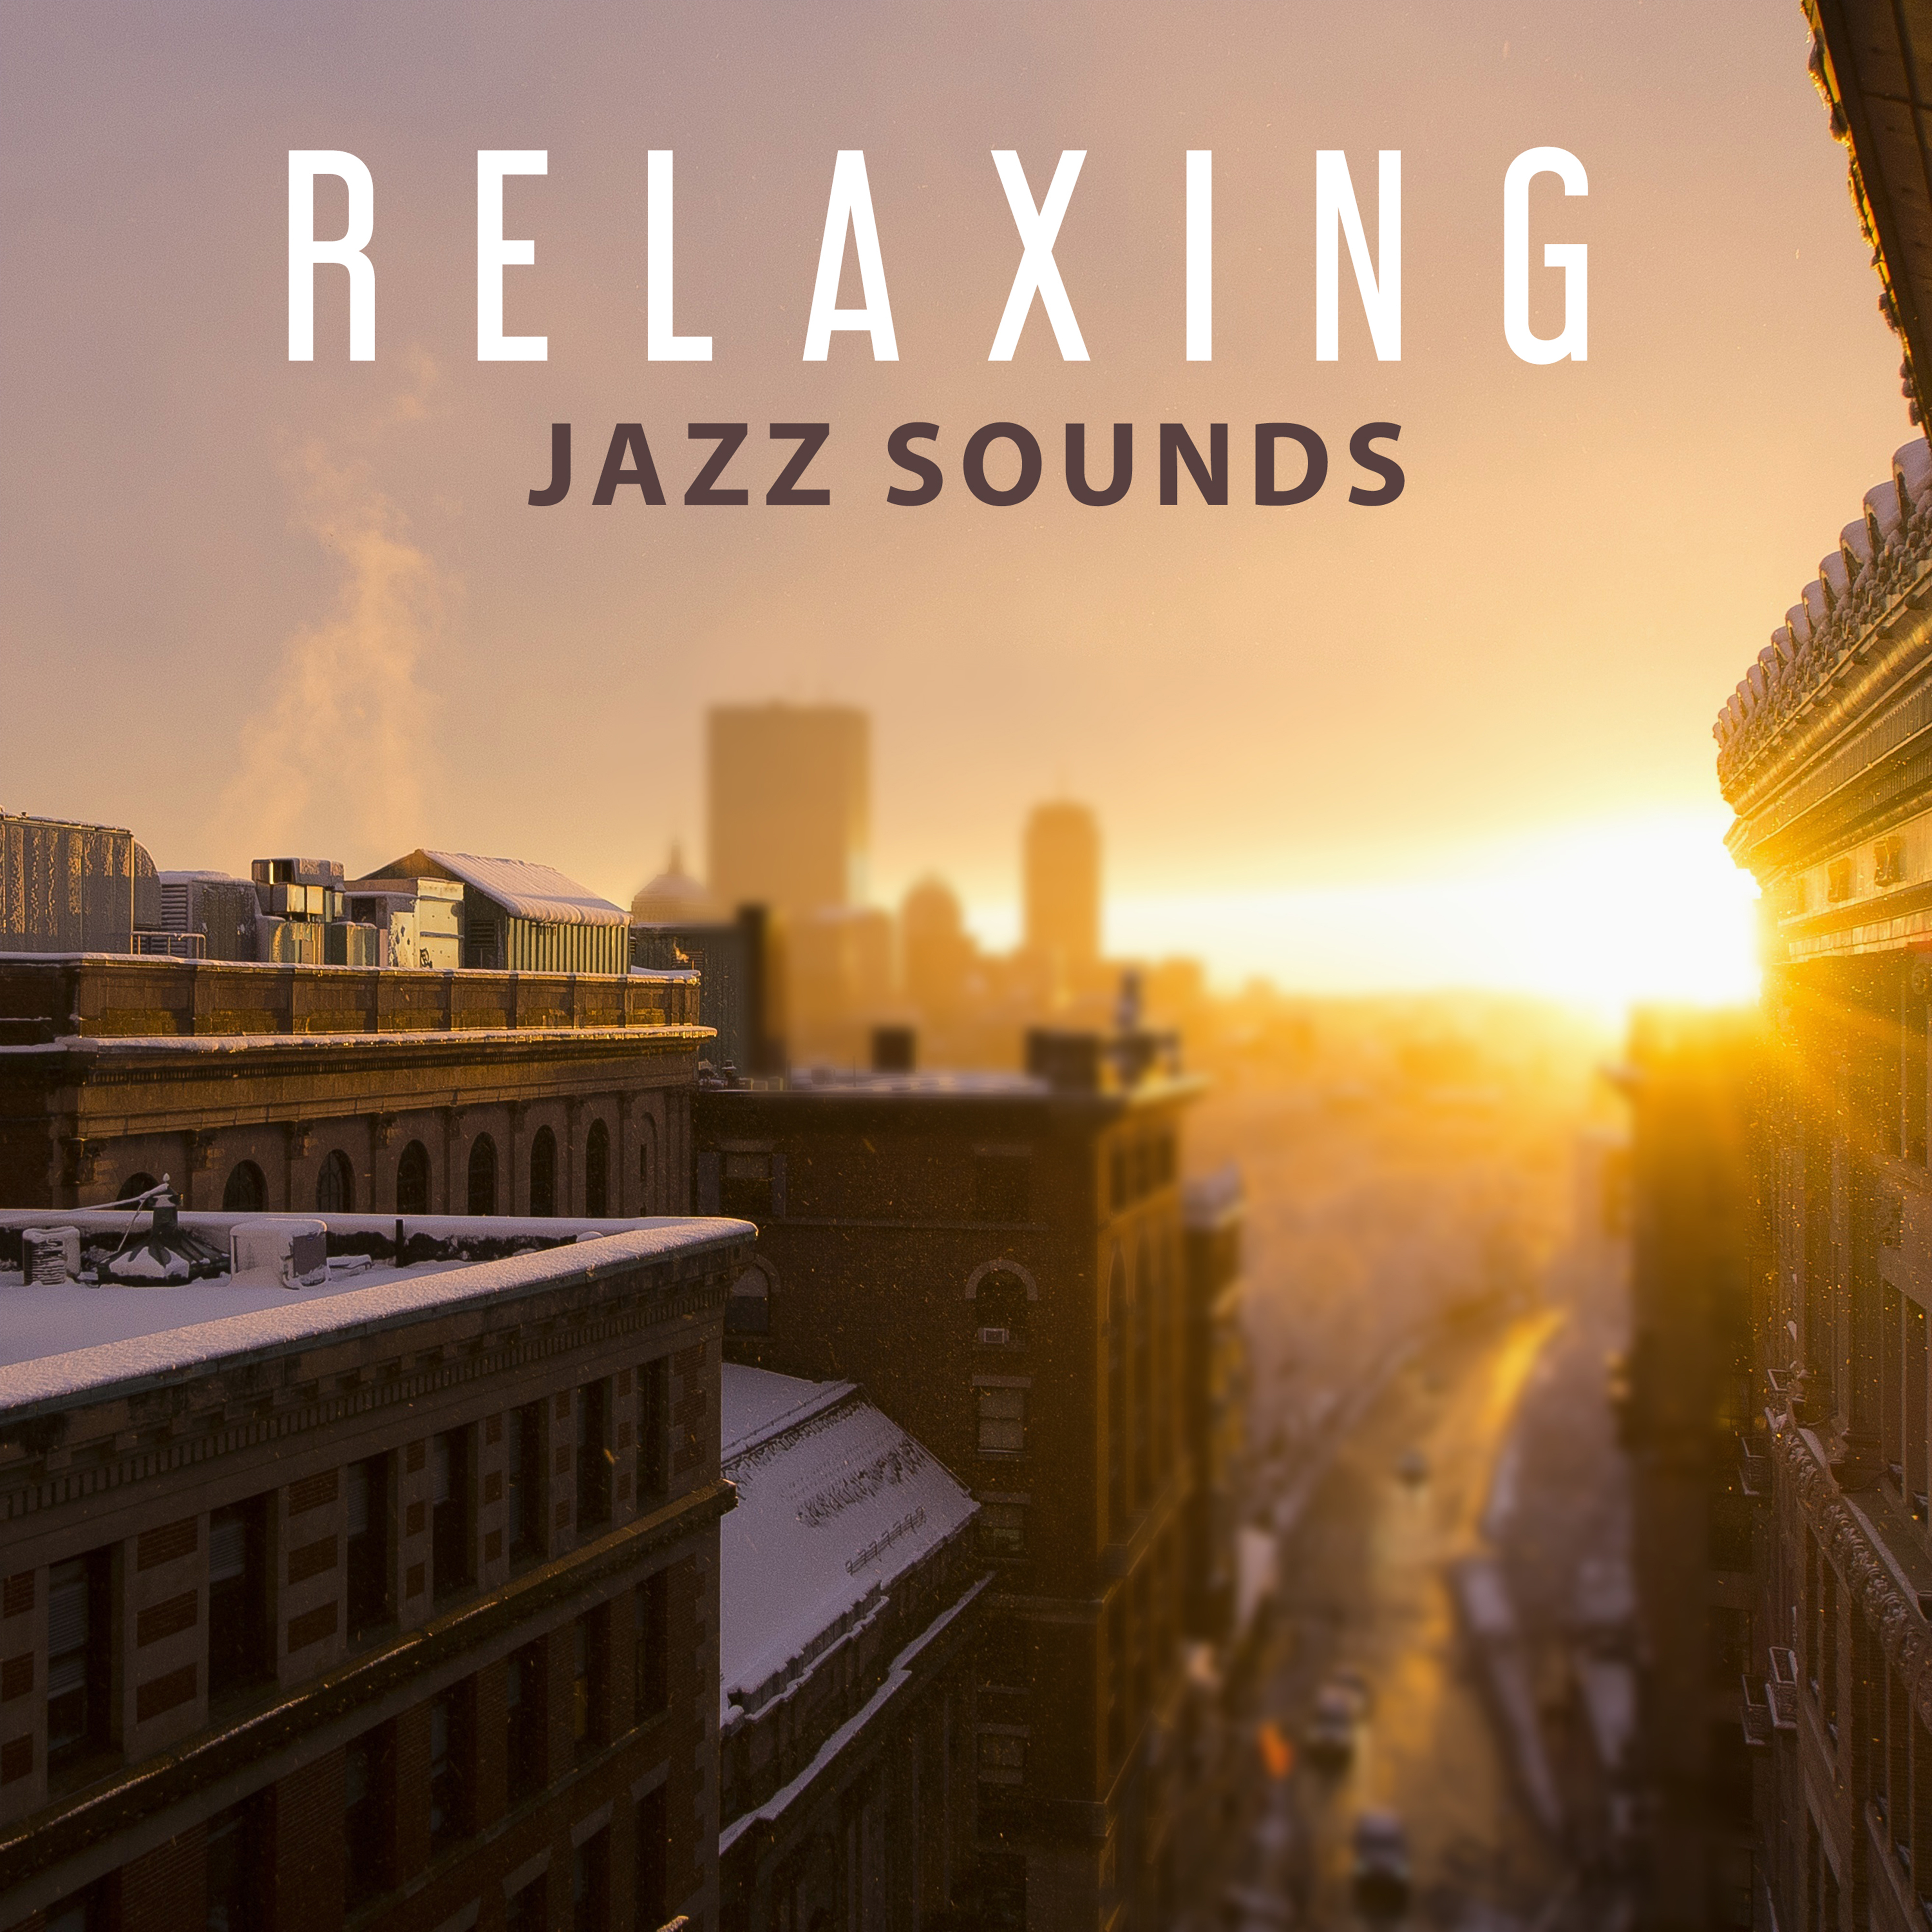 Relaxing Jazz Sounds  Instrumental Music for Relax Time, Easy Listening Soft Classic Melodies